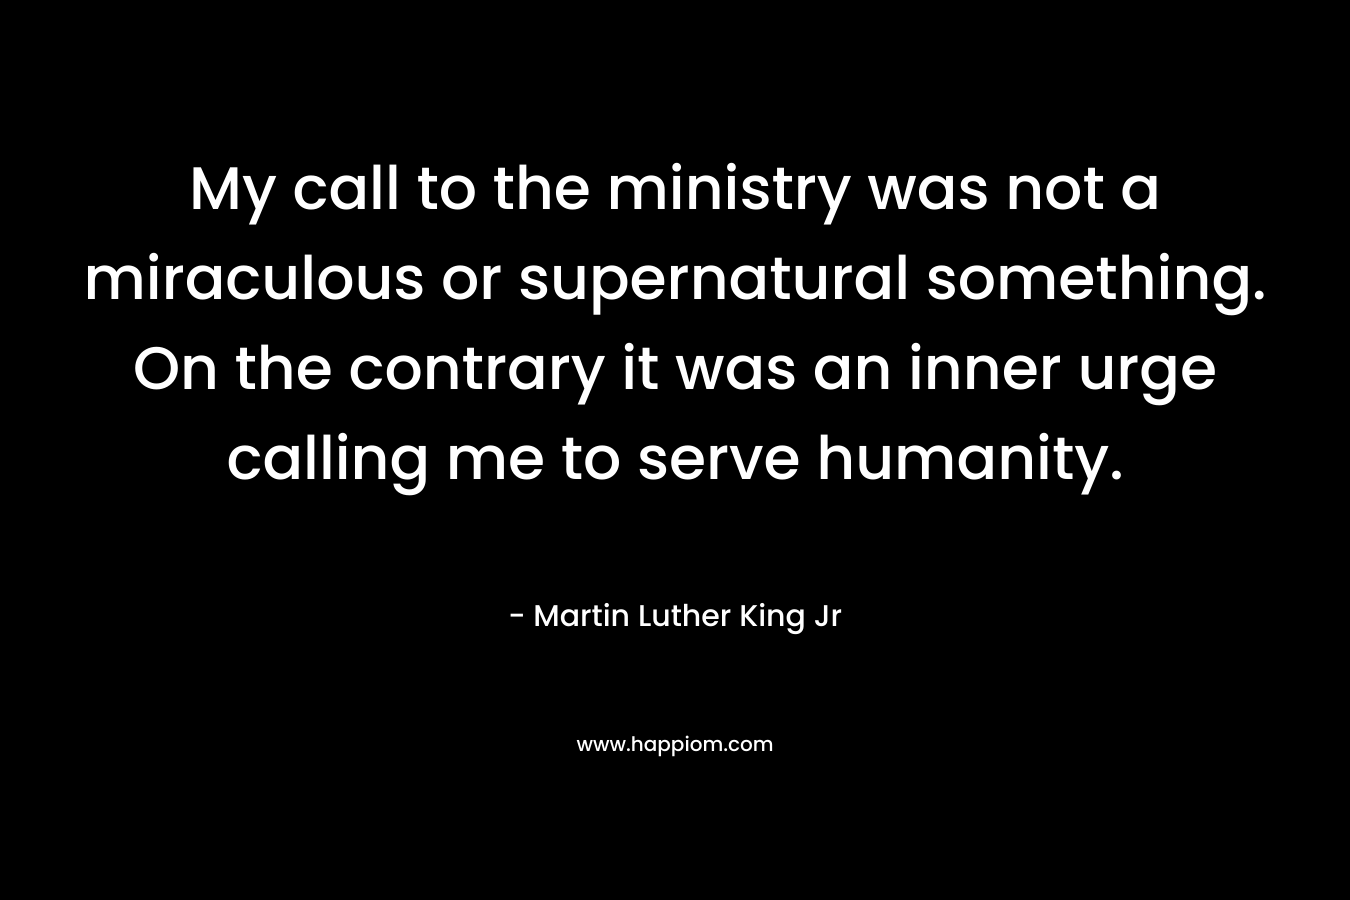 My call to the ministry was not a miraculous or supernatural something. On the contrary it was an inner urge calling me to serve humanity. – Martin Luther King Jr